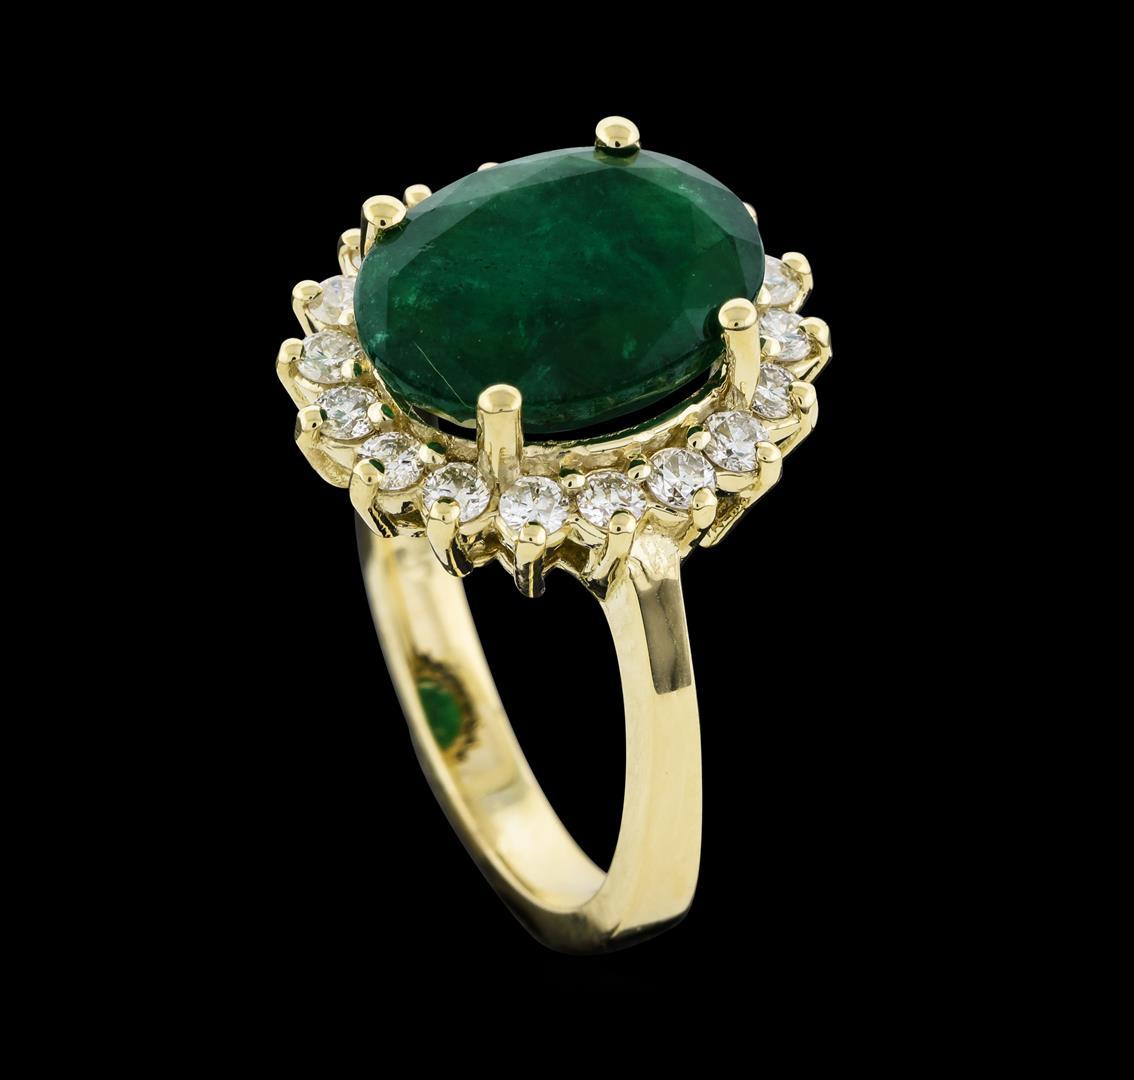 4.41 ctw Emerald and Diamond Ring - 14KT Yellow Gold